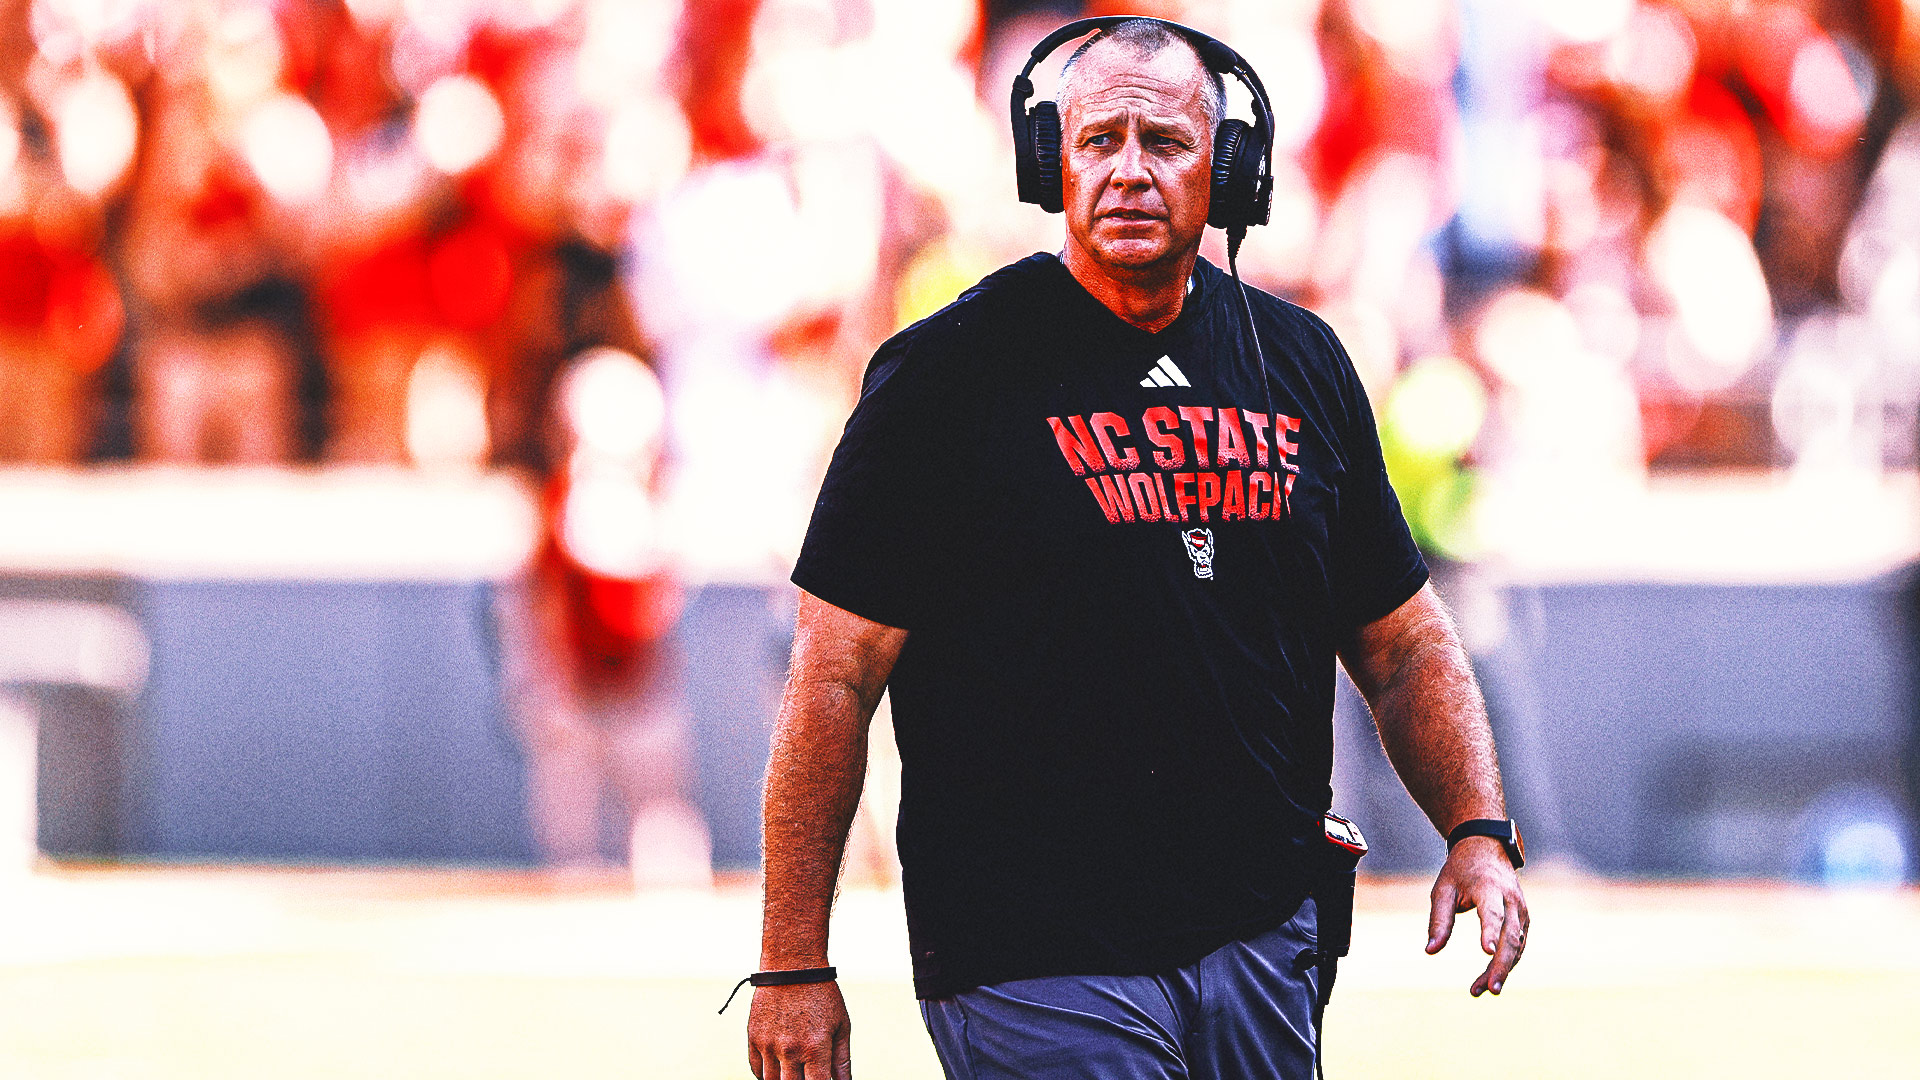 NC State’s Dave Doeren says he and ex-NFL star Steve Smith Sr. are all good